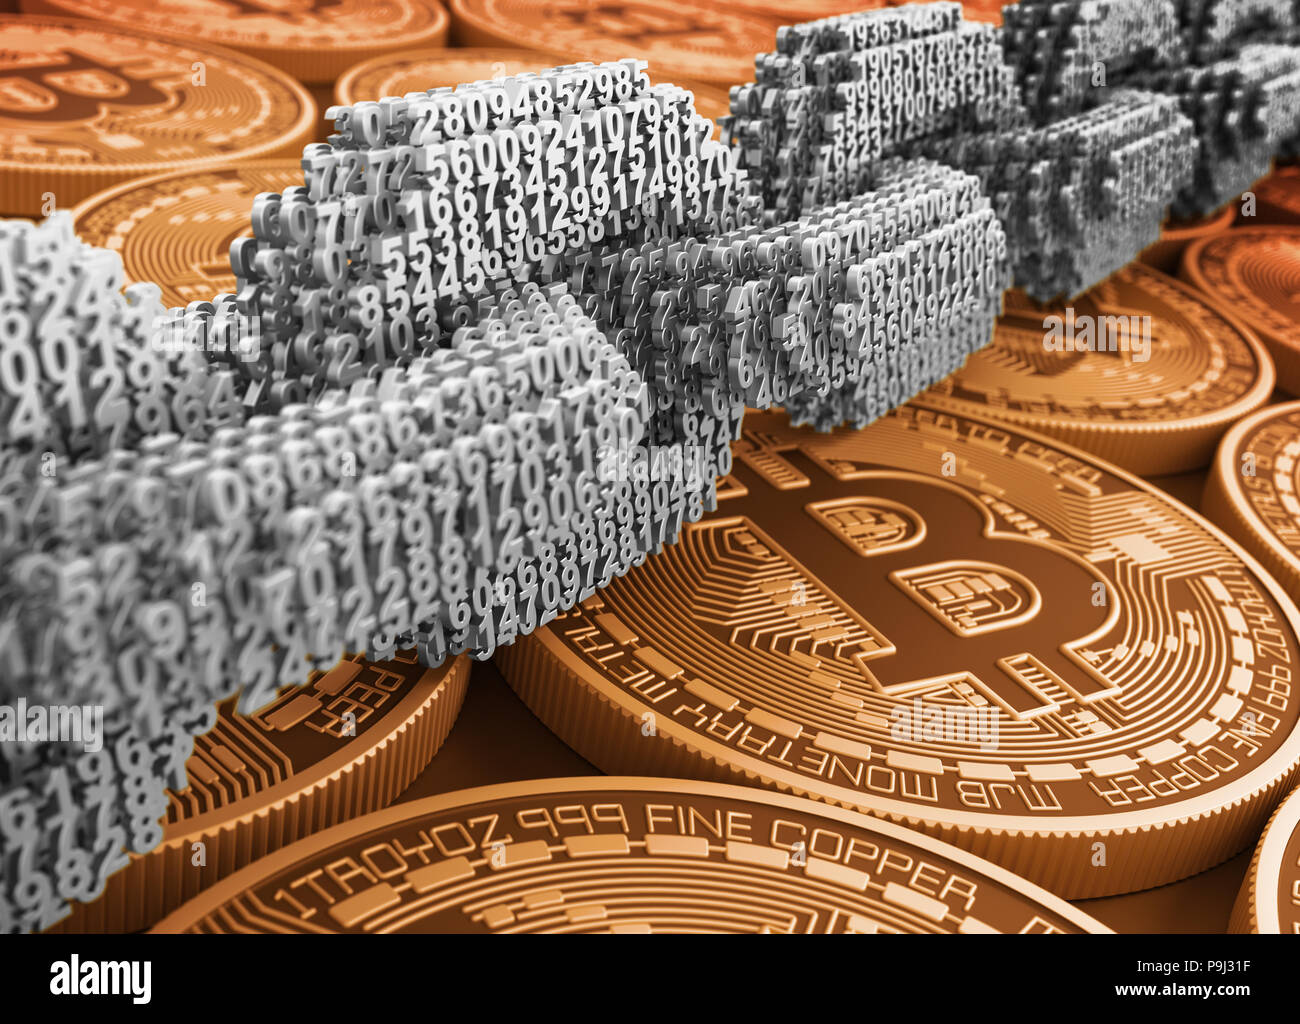 Silver Digital Chain Of Interconnected 3D Numbers On Golden Bitcoins. 3D Illustration. Stock Photo